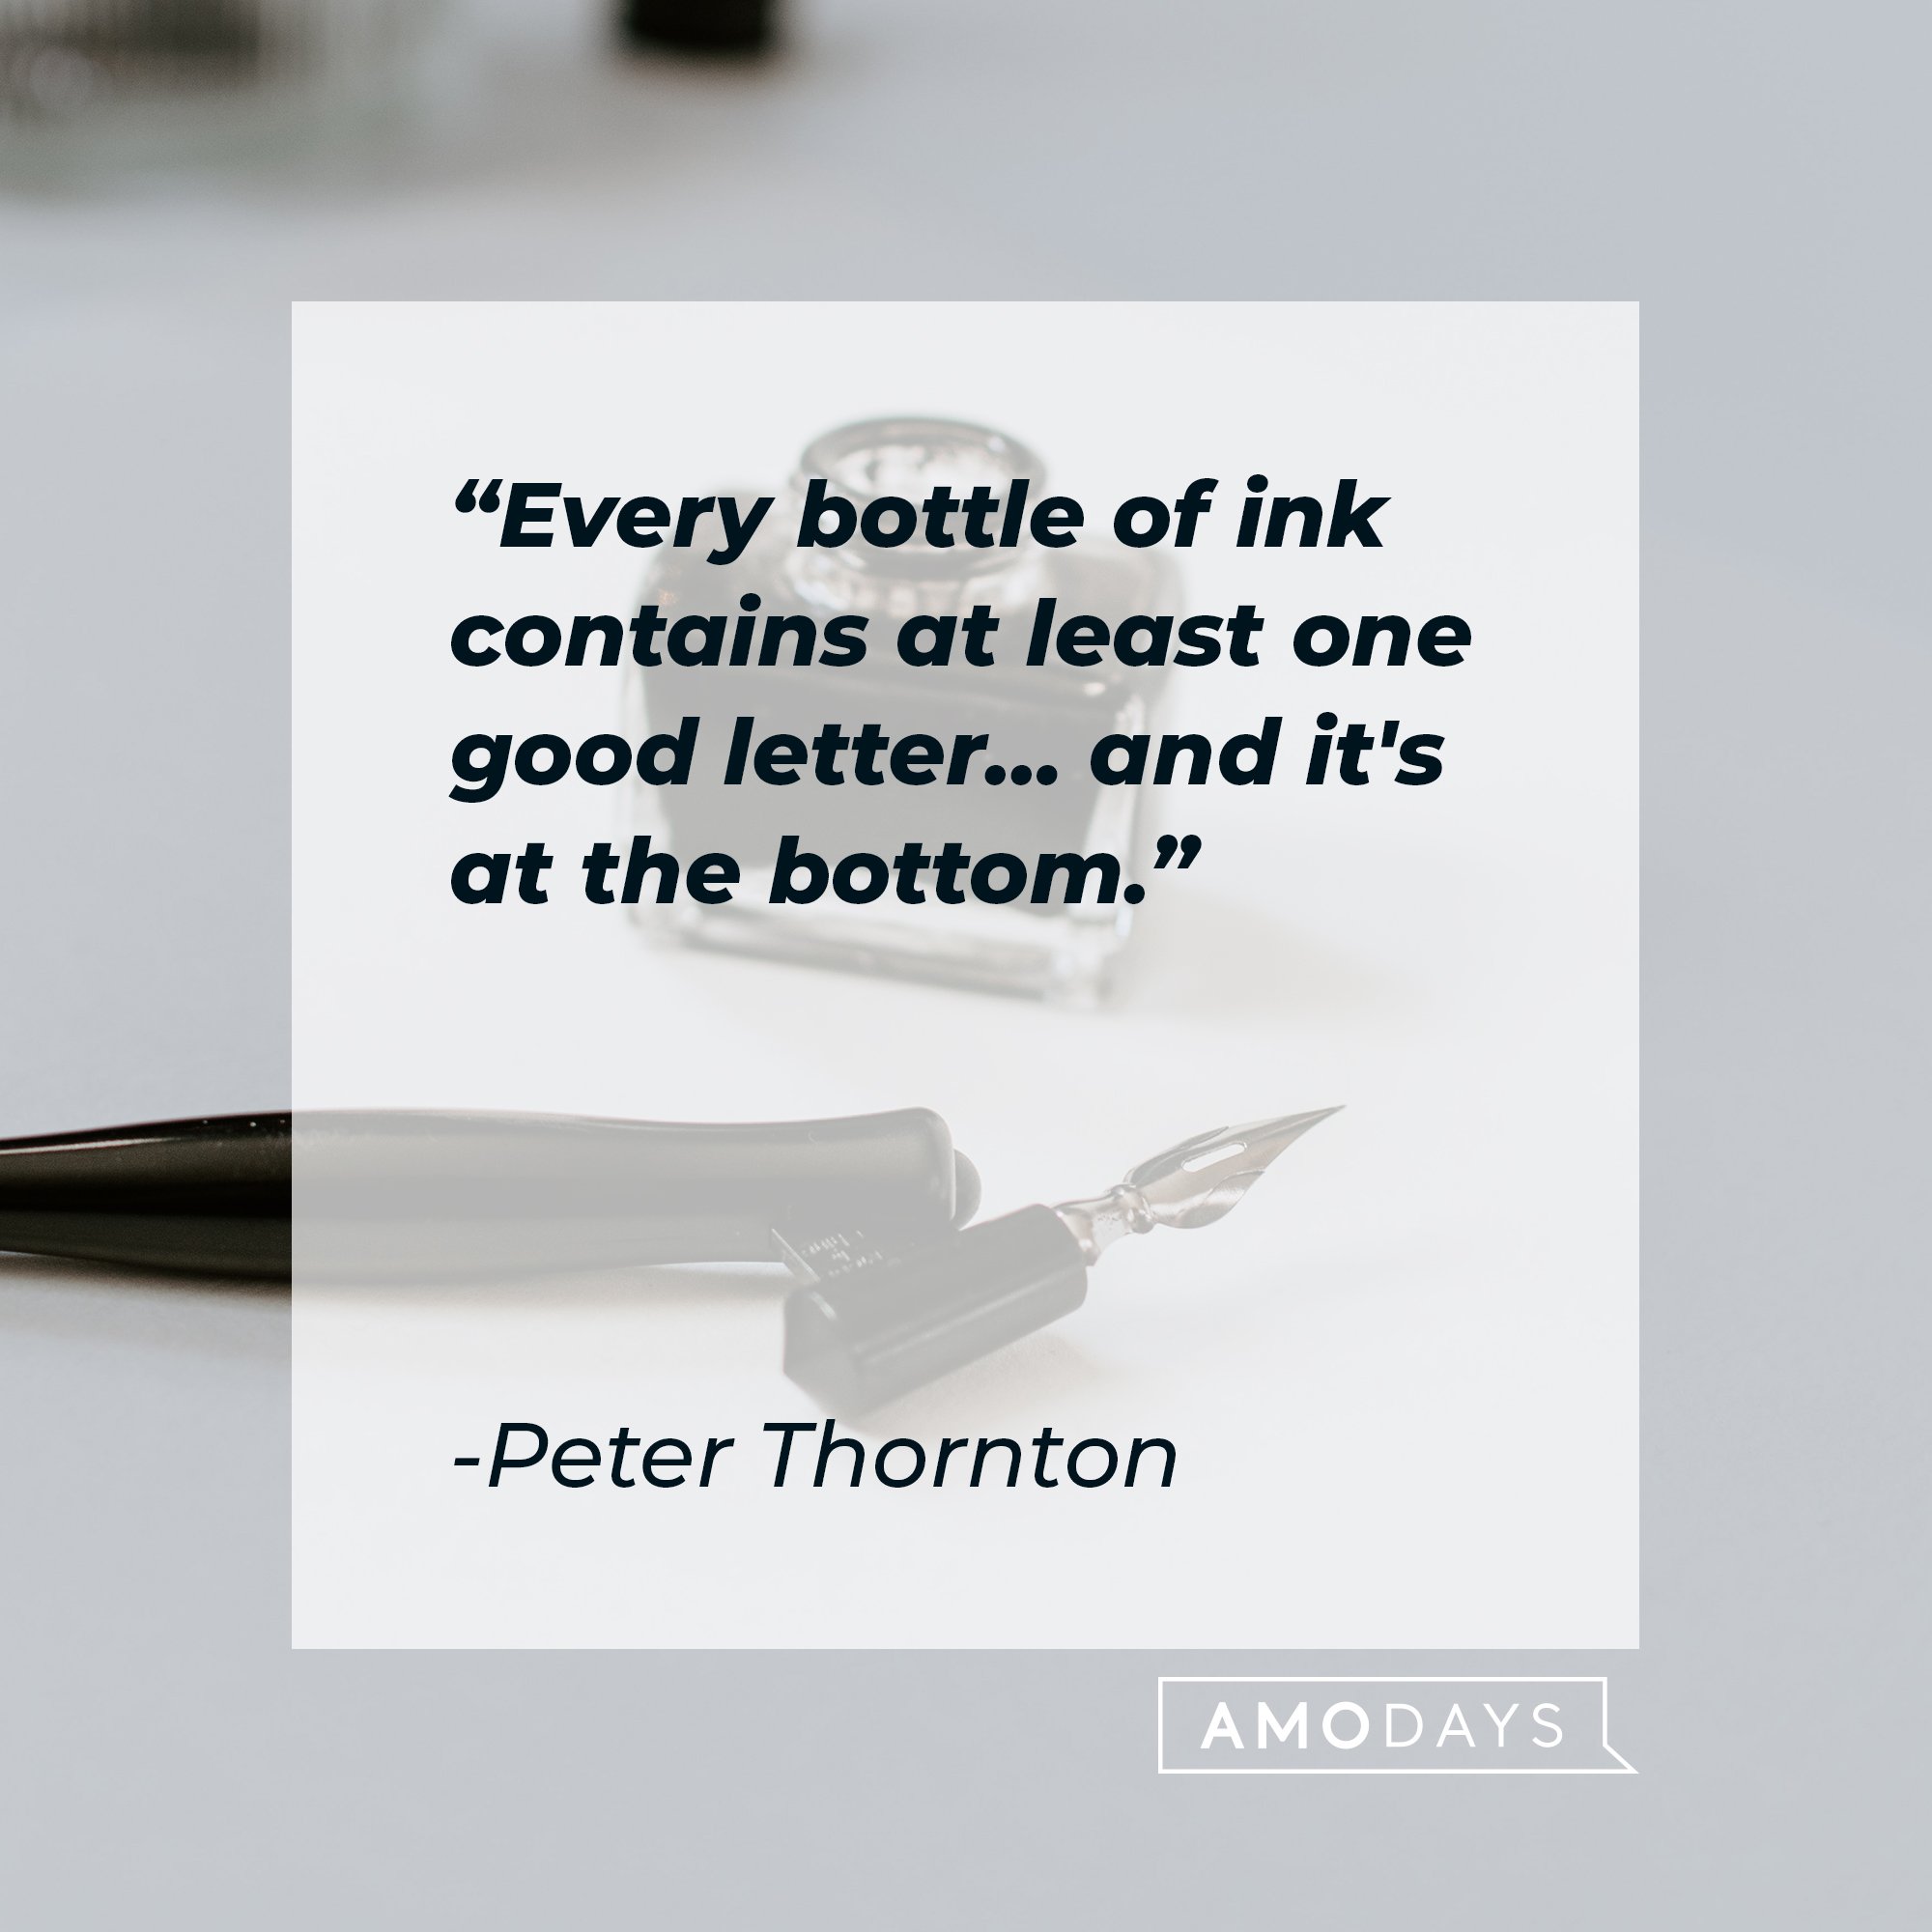 Peter Thornton’s quote: "Every bottle of ink contains at least one good letter… and it's at the bottom." | Image: AmoDays  